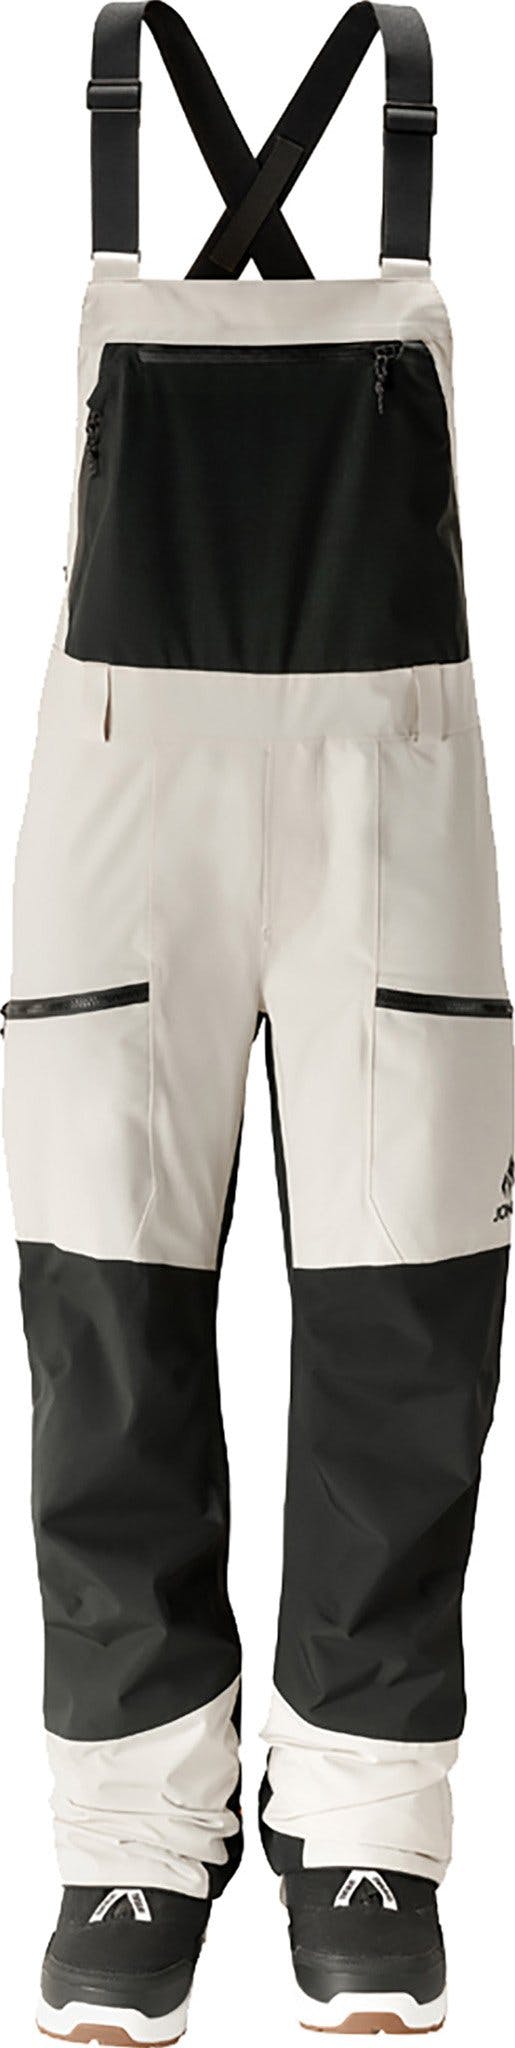 Product image for MTN Surf Recycled Bib Pant - Women's